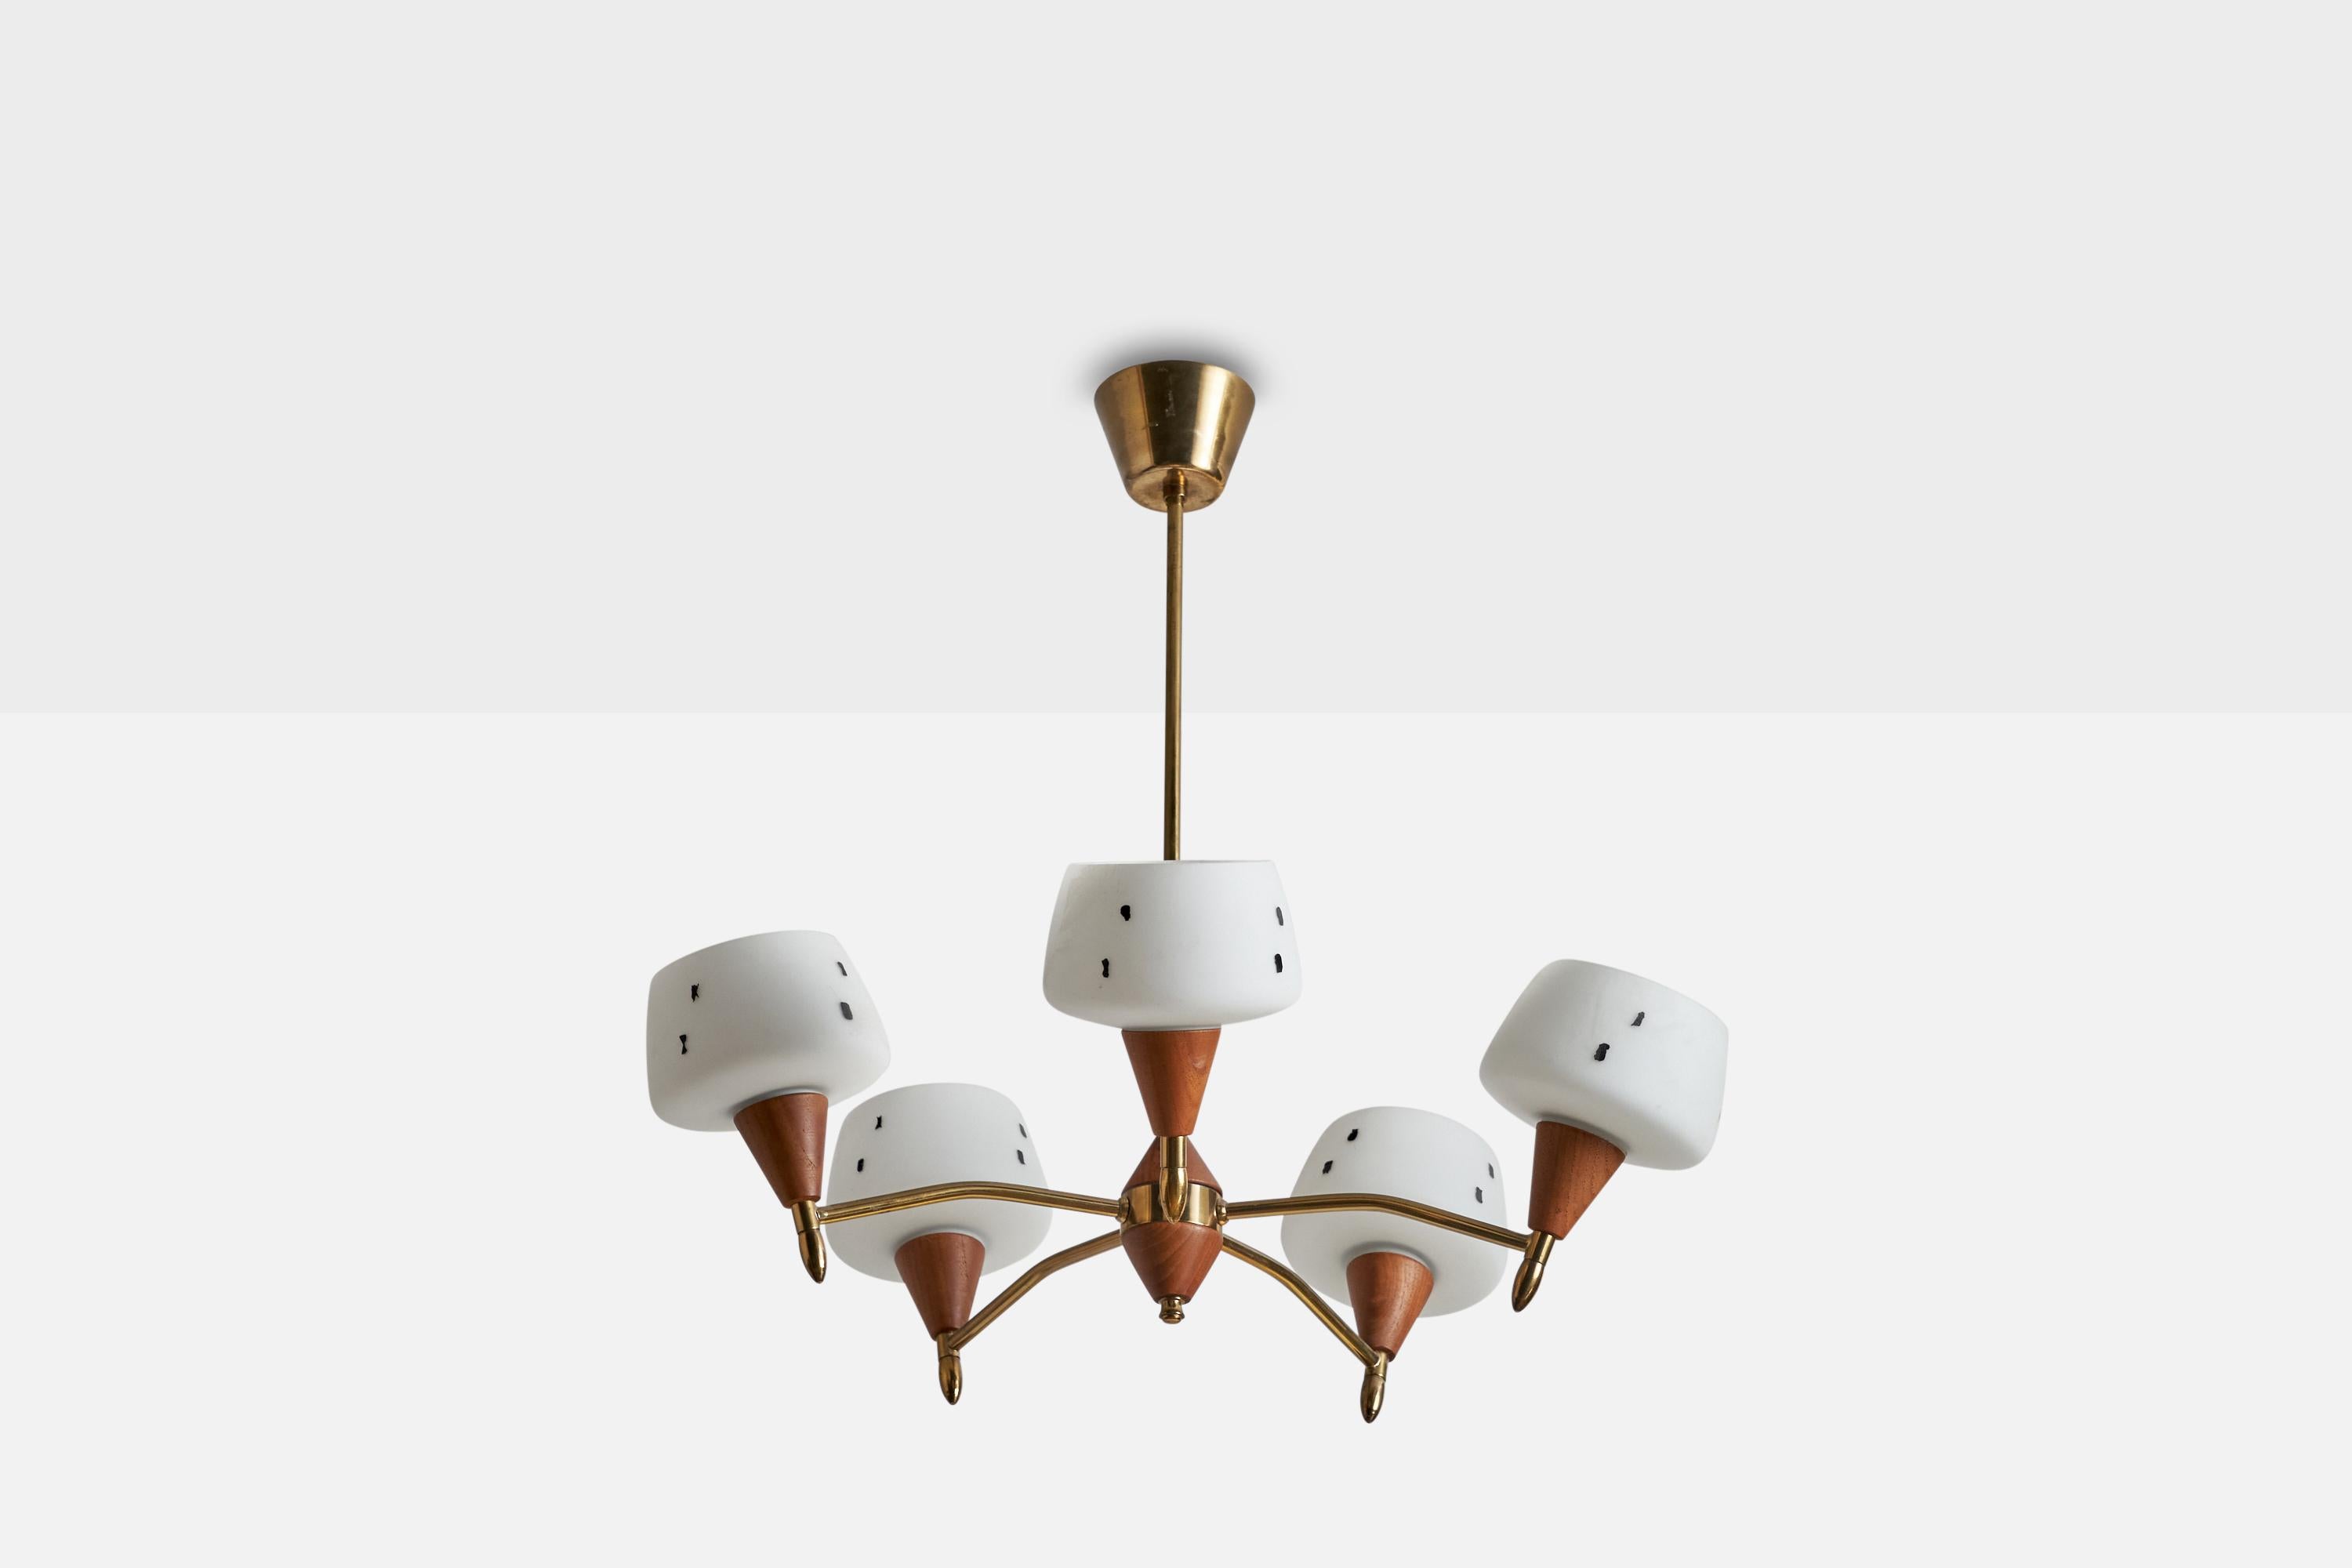 A teak, brass and painted opaline glass chandelier designed and produced in Sweden, 1950s.

Dimensions of canopy (inches): 2.25” H x 3.5” Diameter
Socket takes standard E-26 bulbs. 5 sockets.There is no maximum wattage stated on the fixture. All